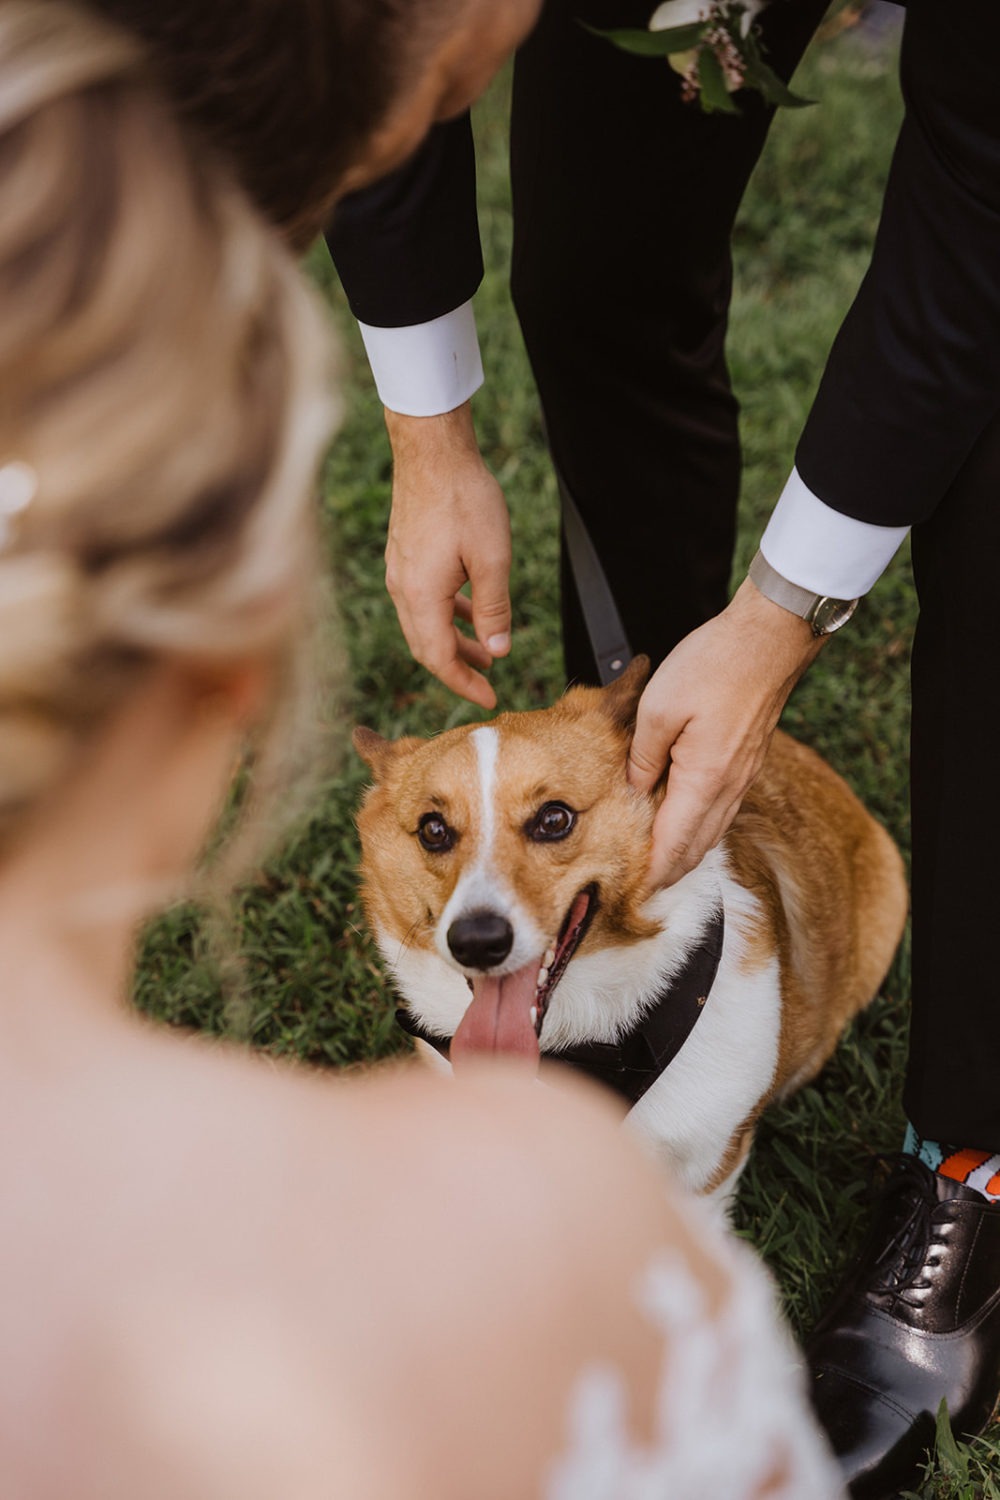 groom pets pet dog at wedding while bride watches